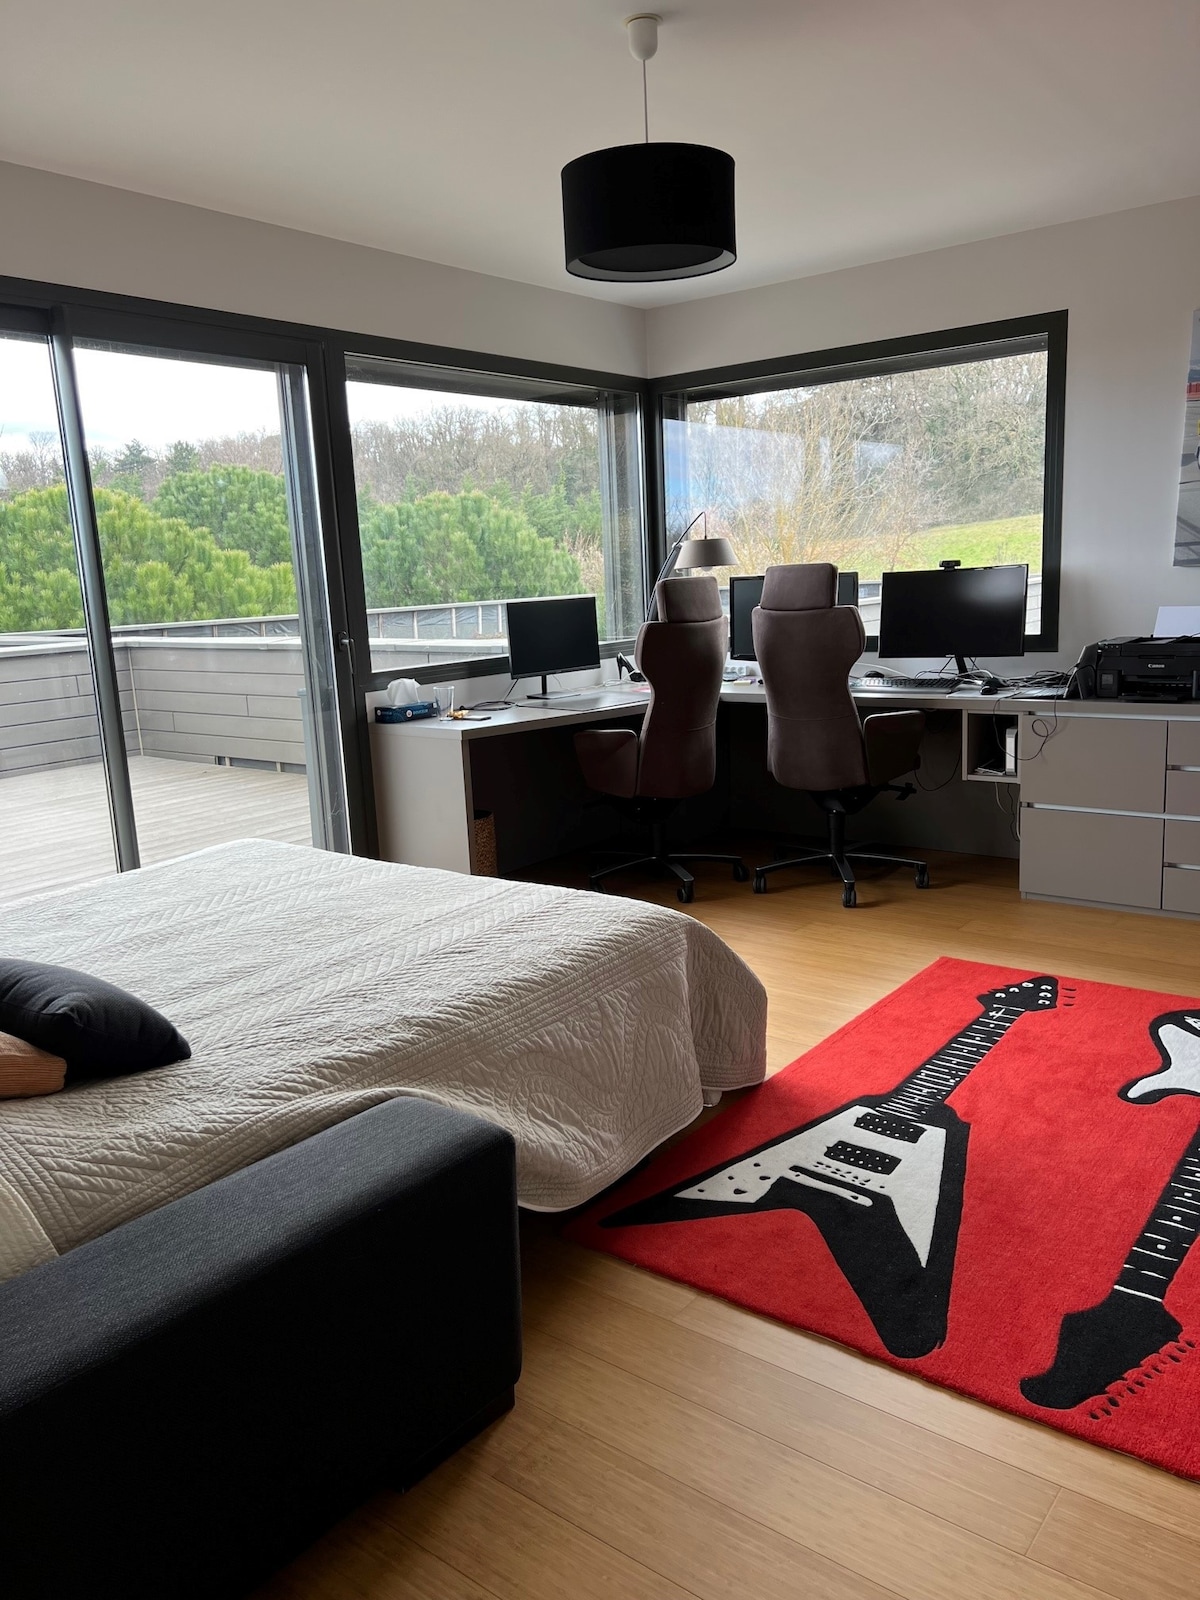 Upstairs bedroom in architect villa with view